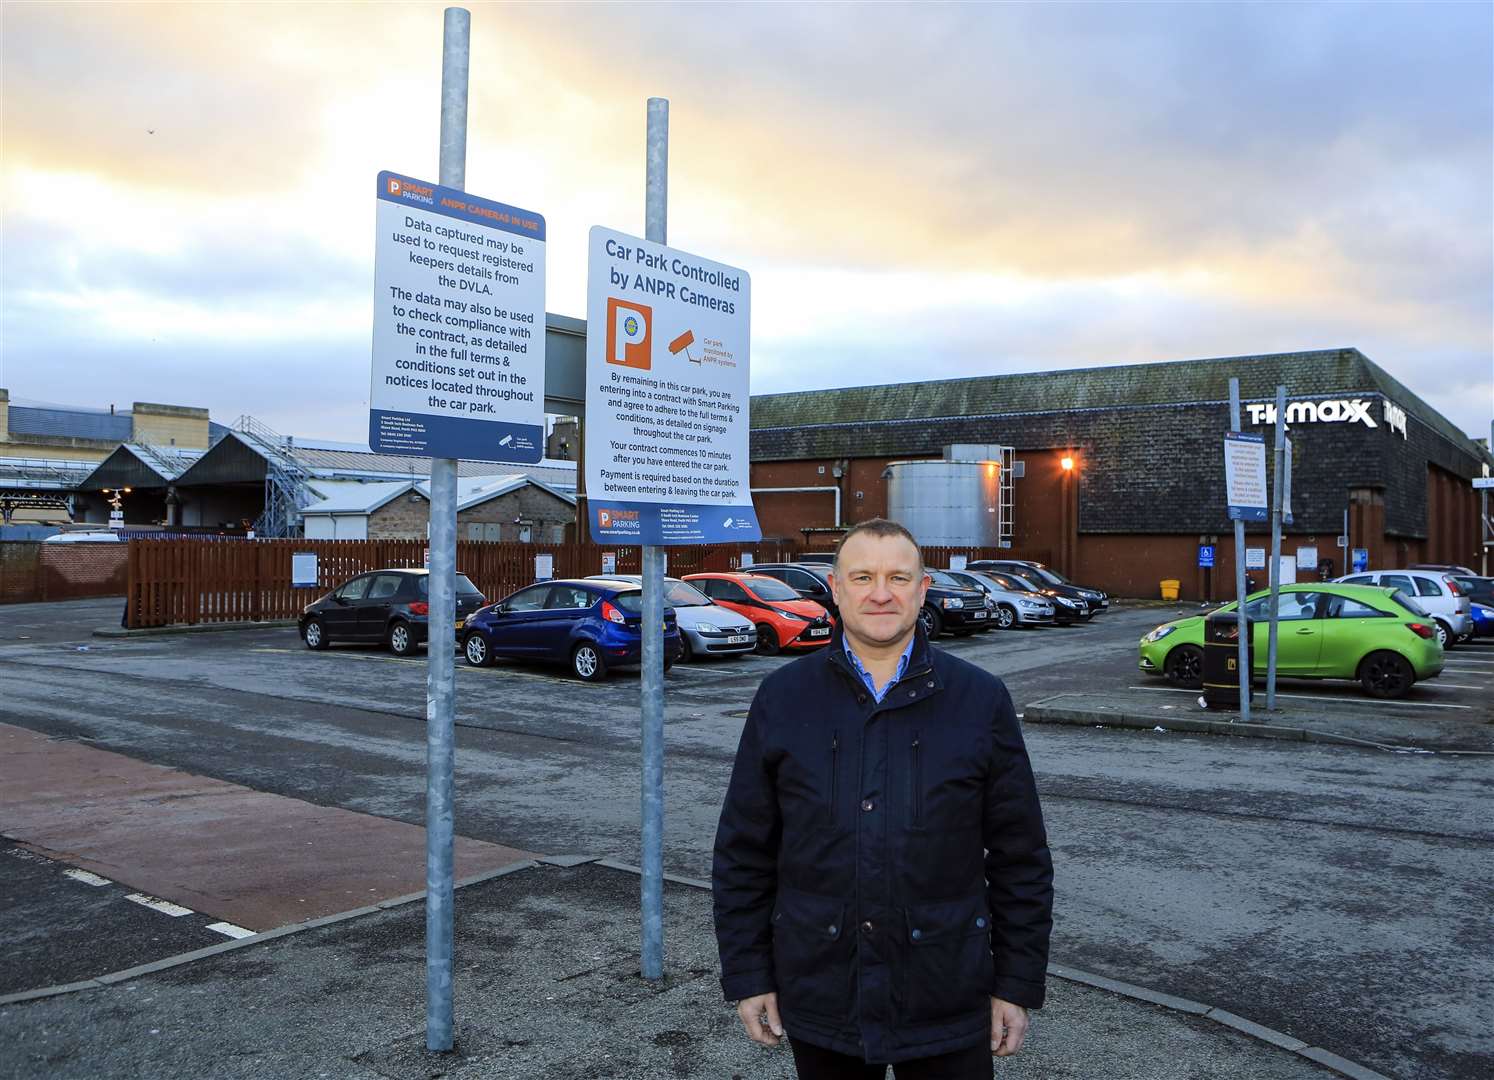 Drew Hendry at Strothers Lane Car Park, where scores of drivers have been fined after entering their number plate details incorrectly when paying for parking.